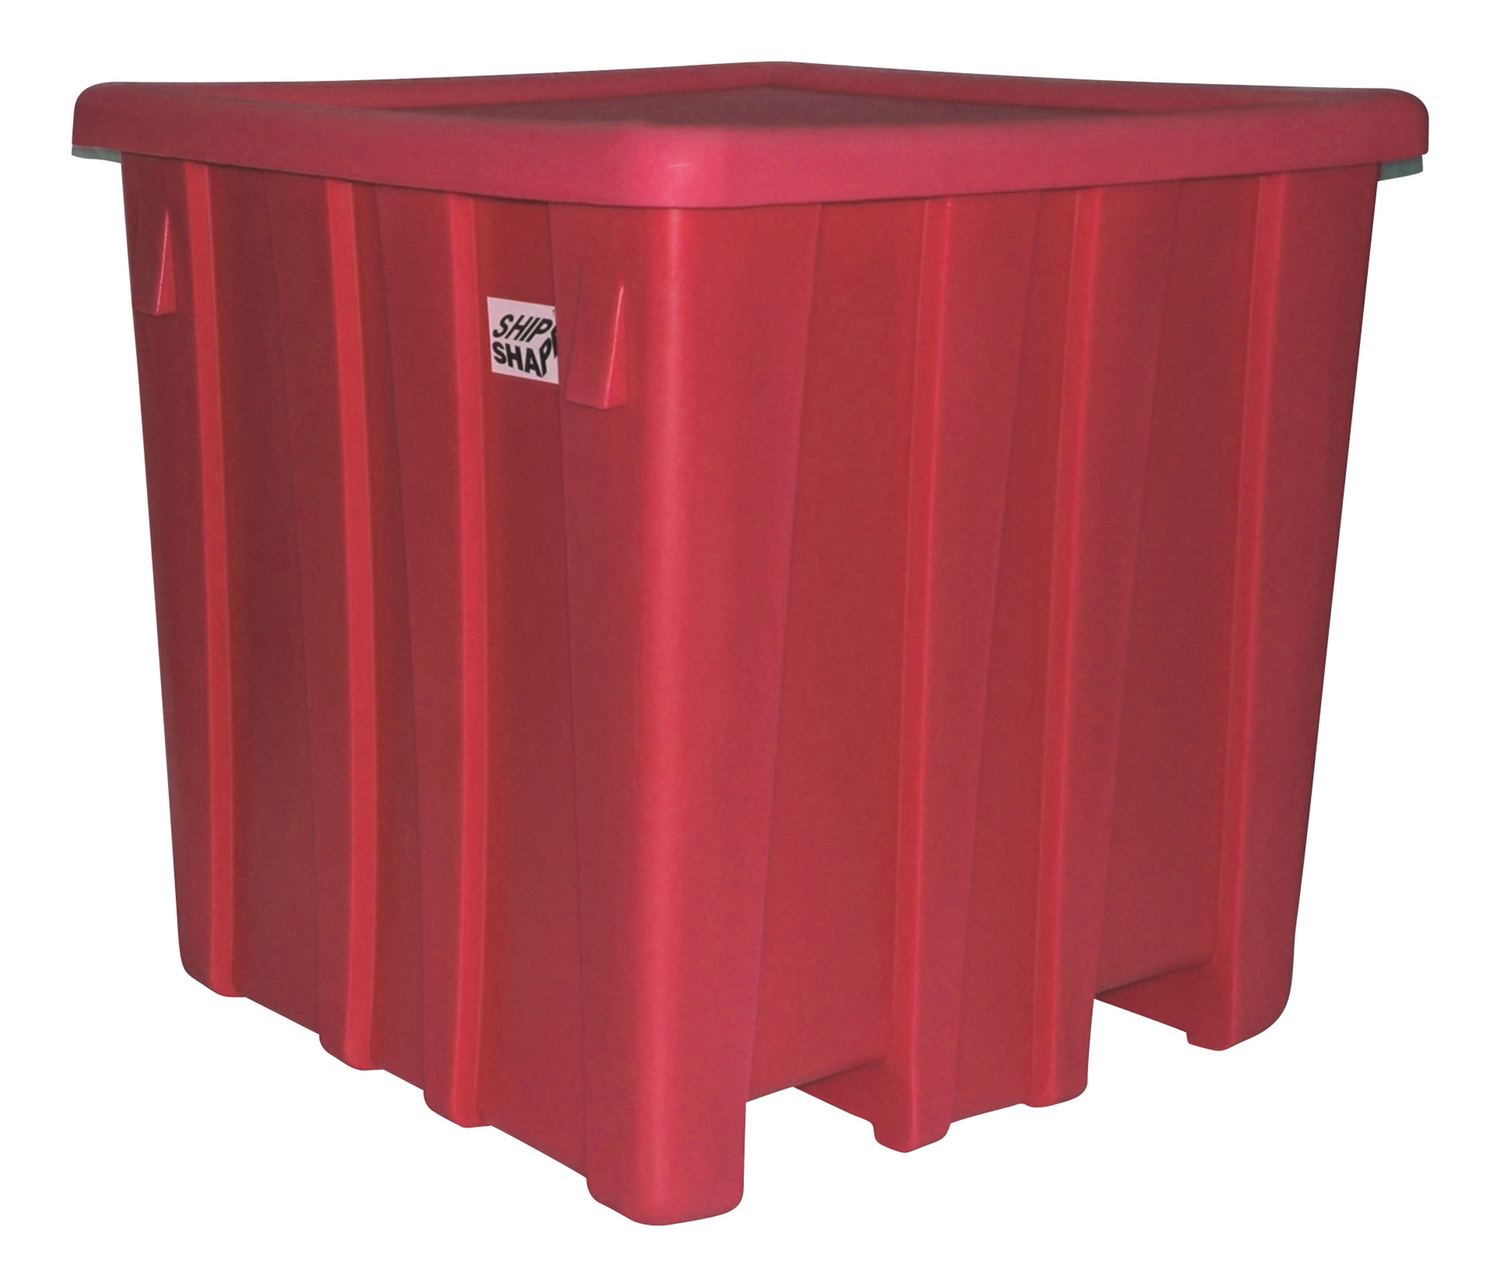 MHBC-4444-R Red Bulk Containers